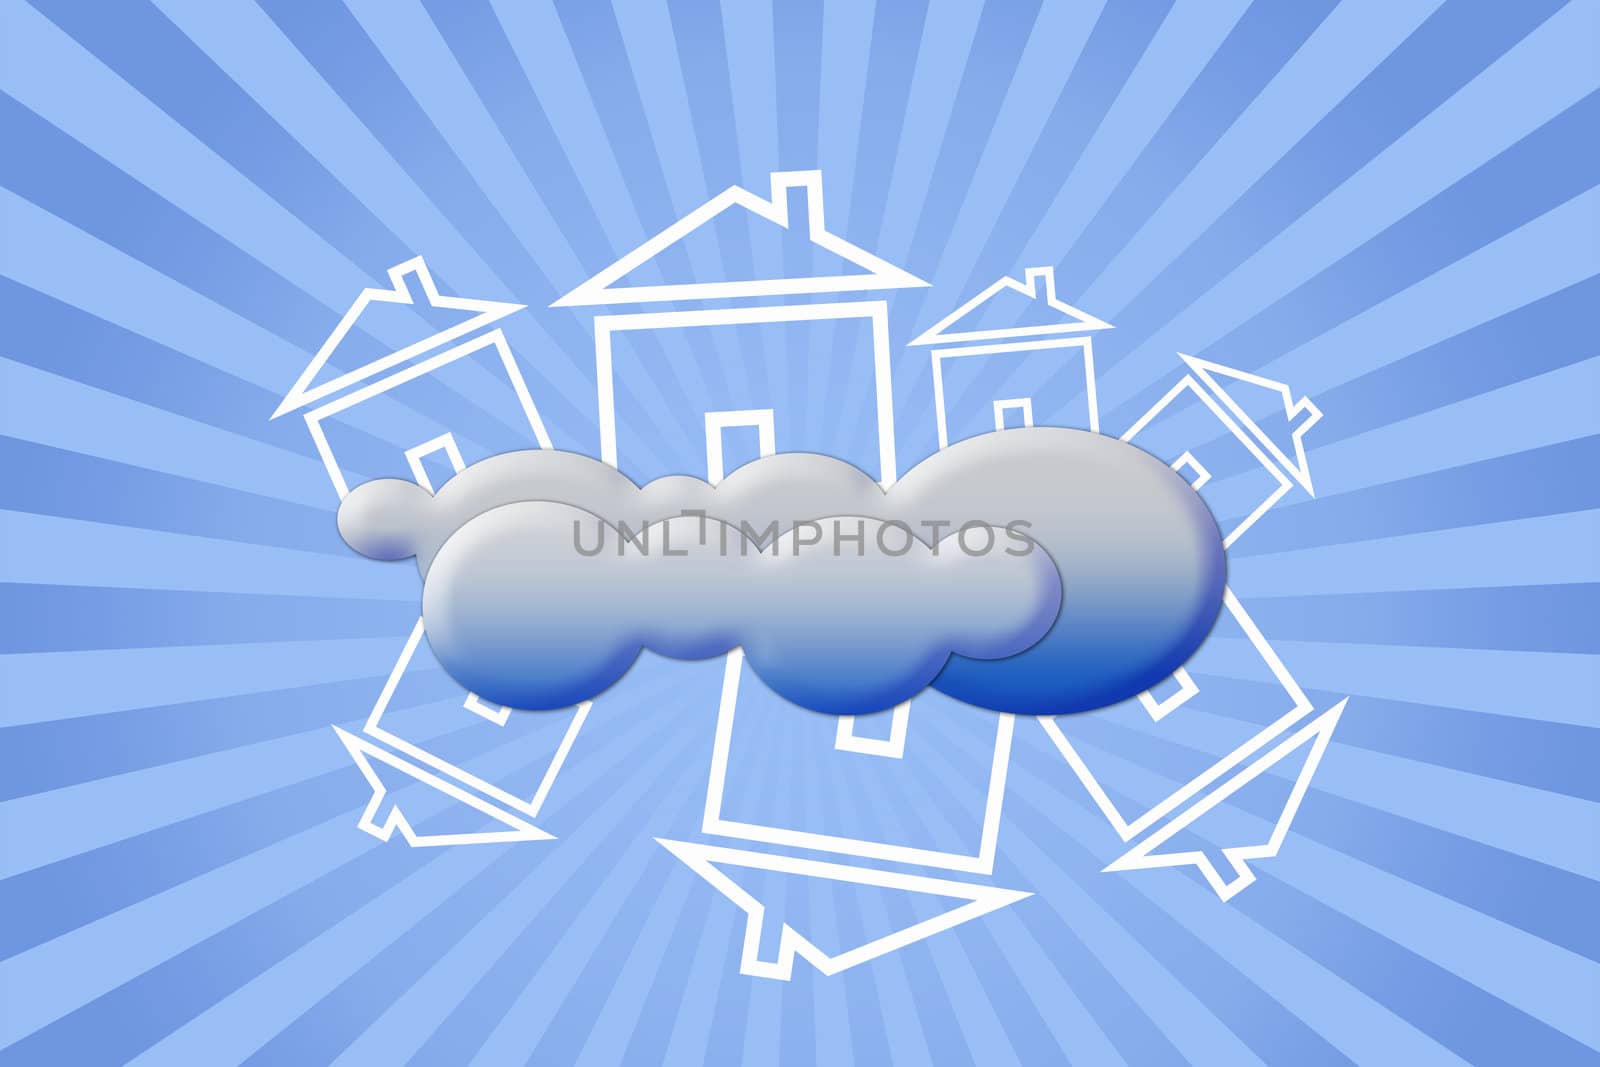 House in clouds by phanlop88